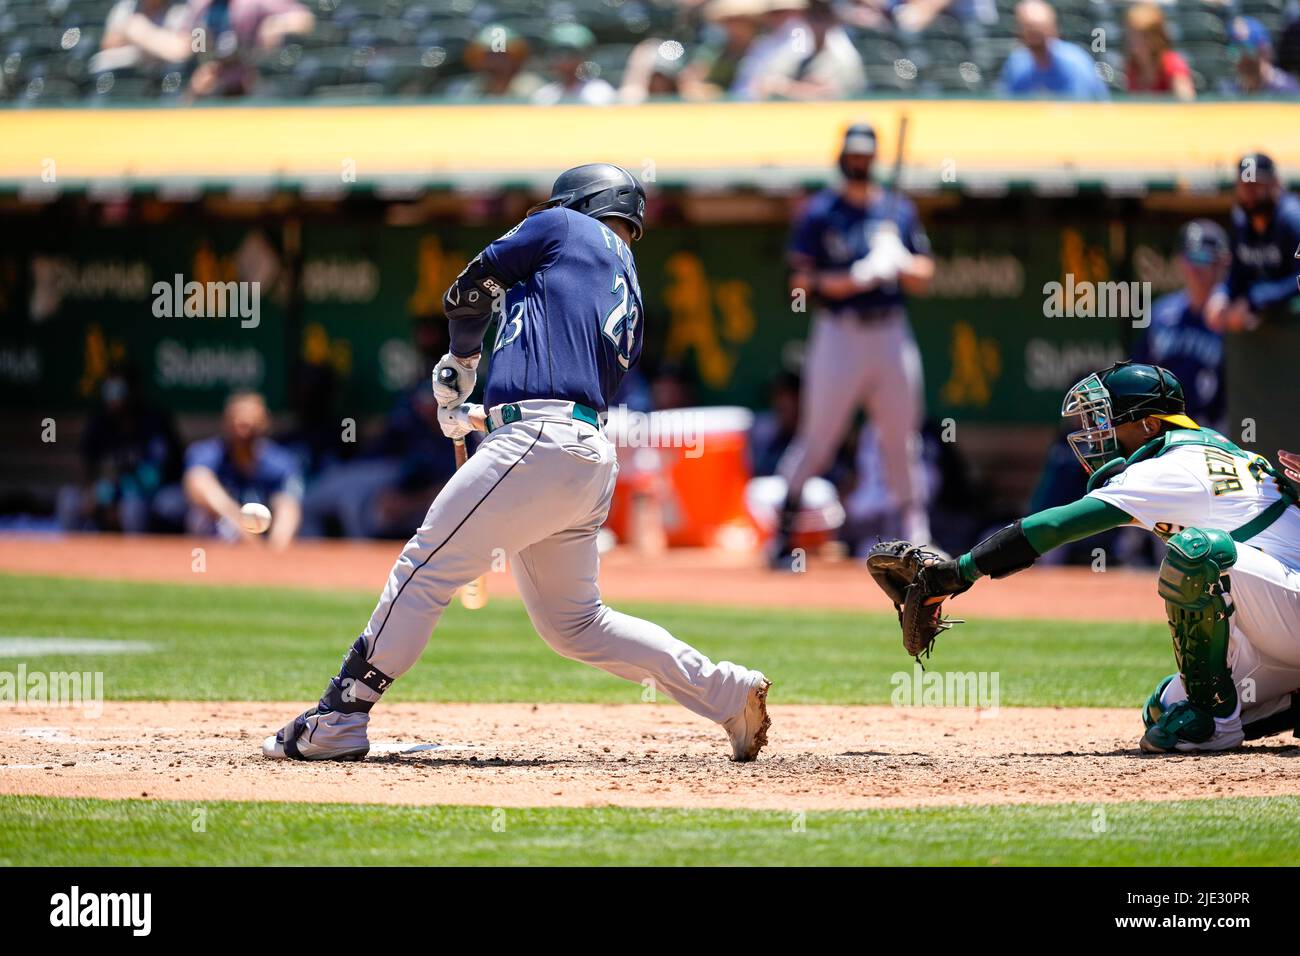 Seattle Mariners' Ty France (23) and Kyle Seager celebrate after a baseball  game against the Houston